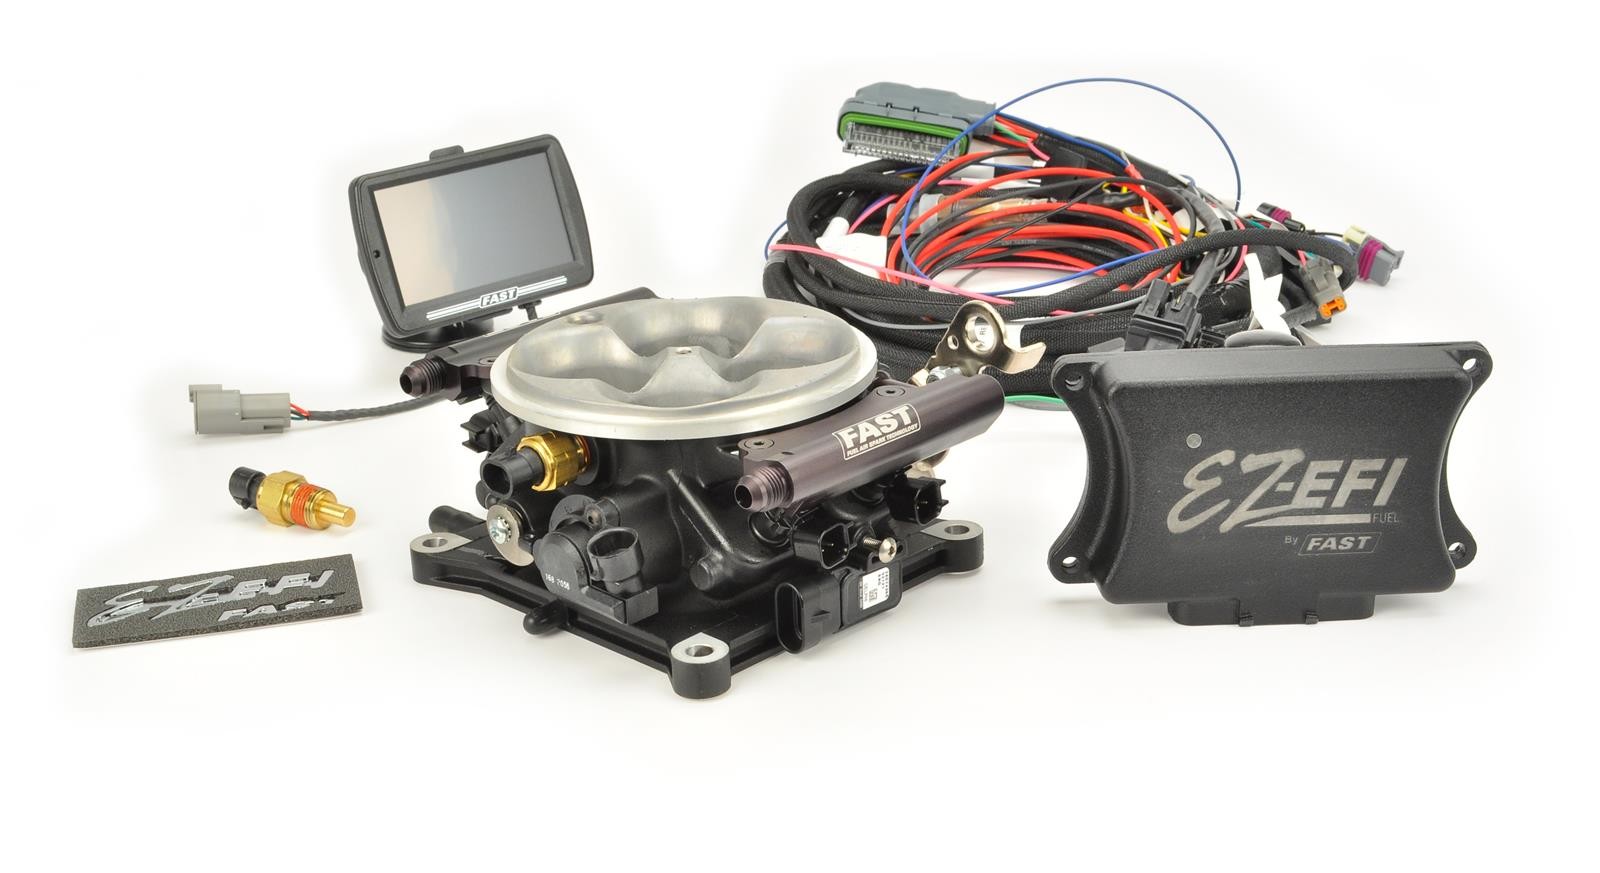 FAST EZ-EFI Self-Tuning Fuel Injection System